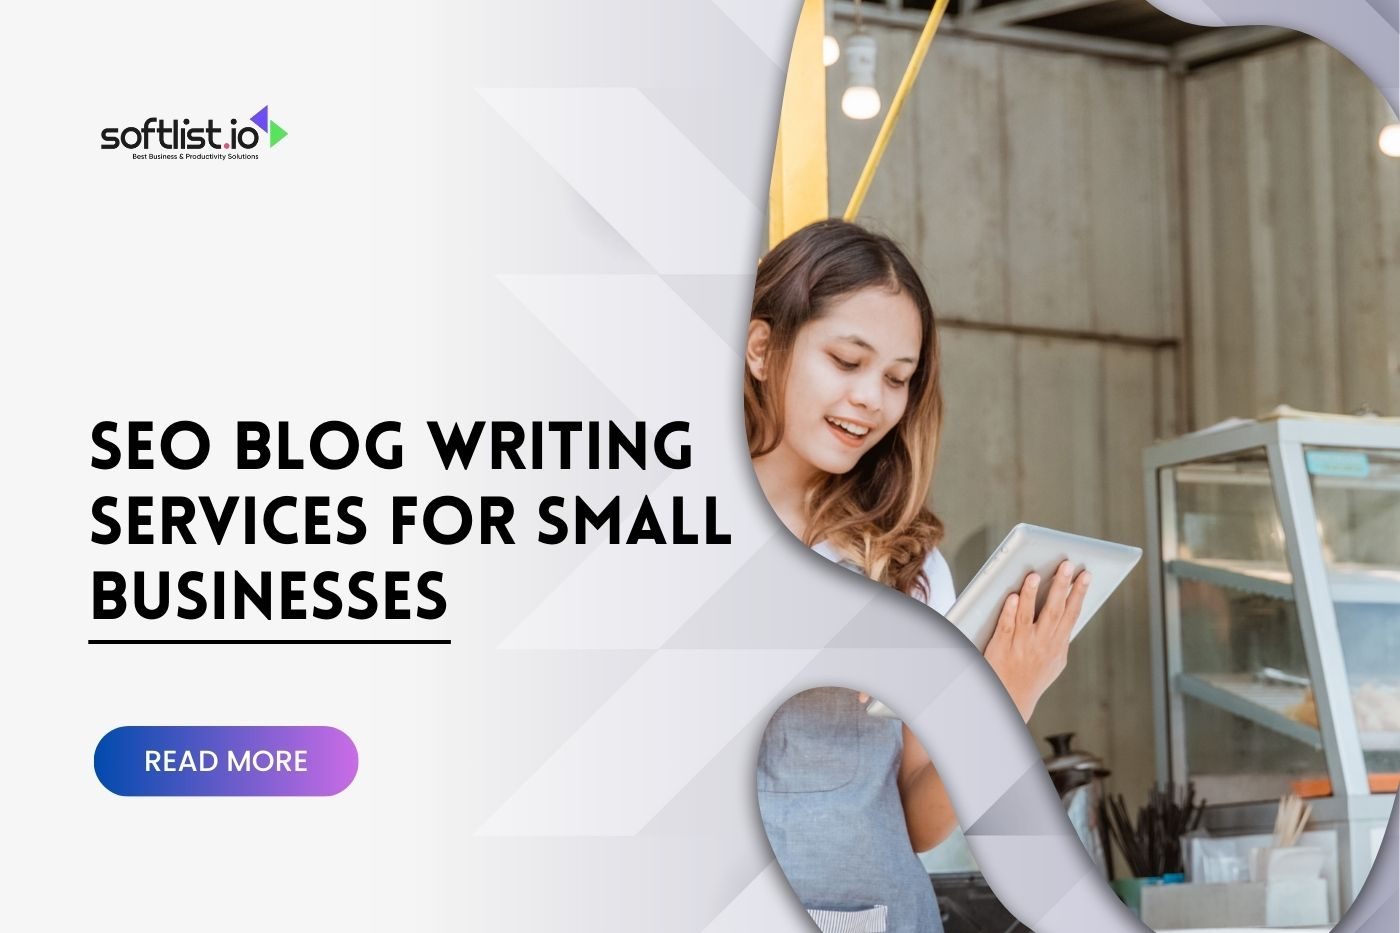 SEO Blog Writing Services for Small Businesses